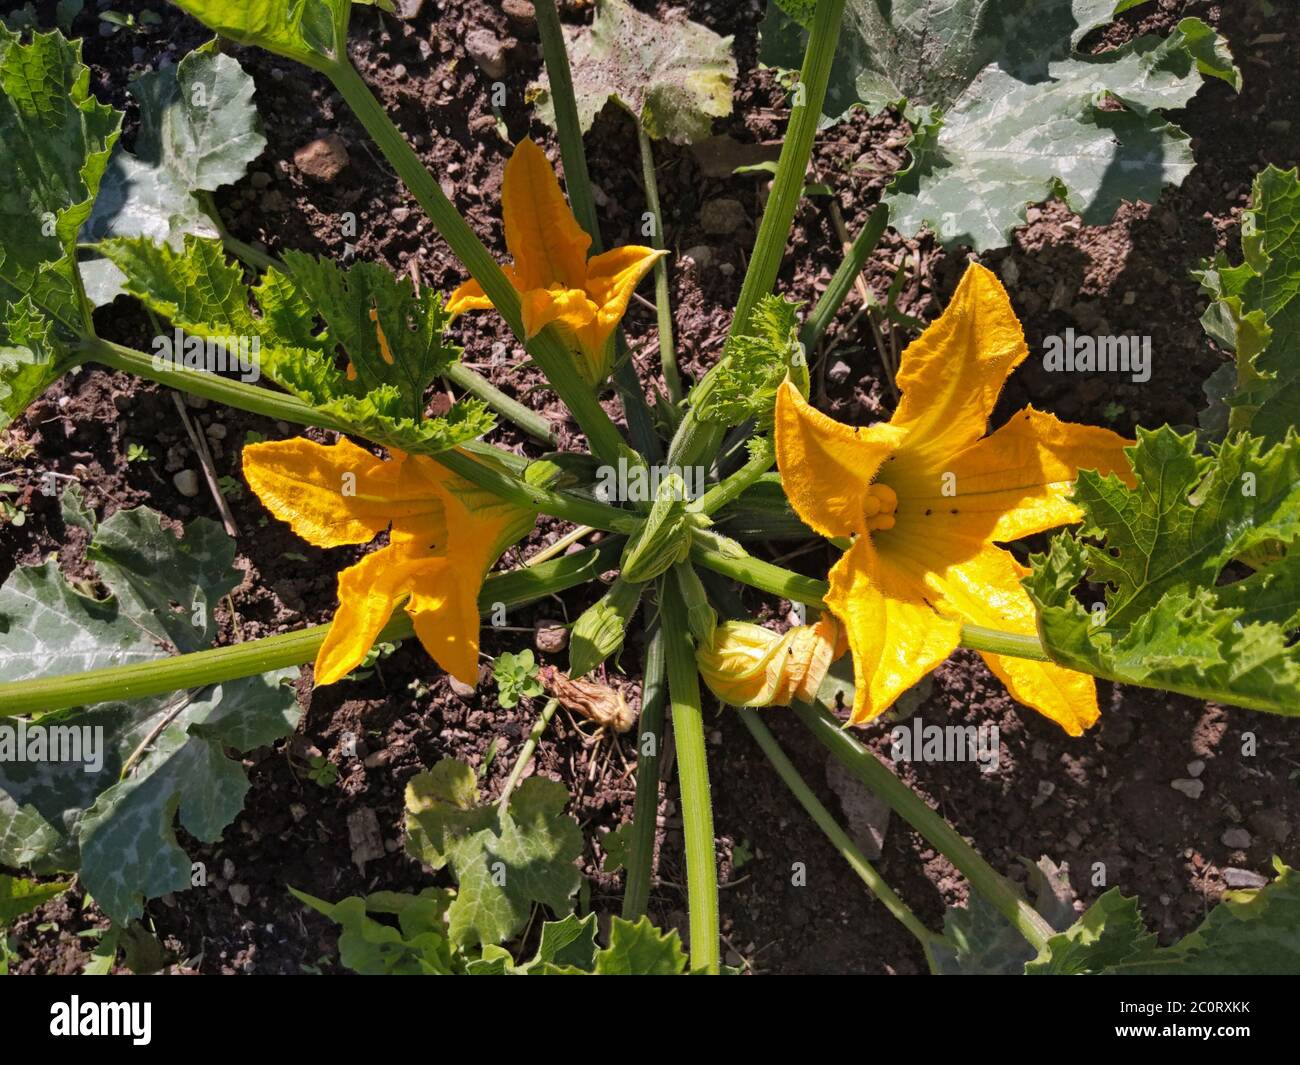 Courgette plant Cucurbita pepo with flowers growing in the garden Stock Photo